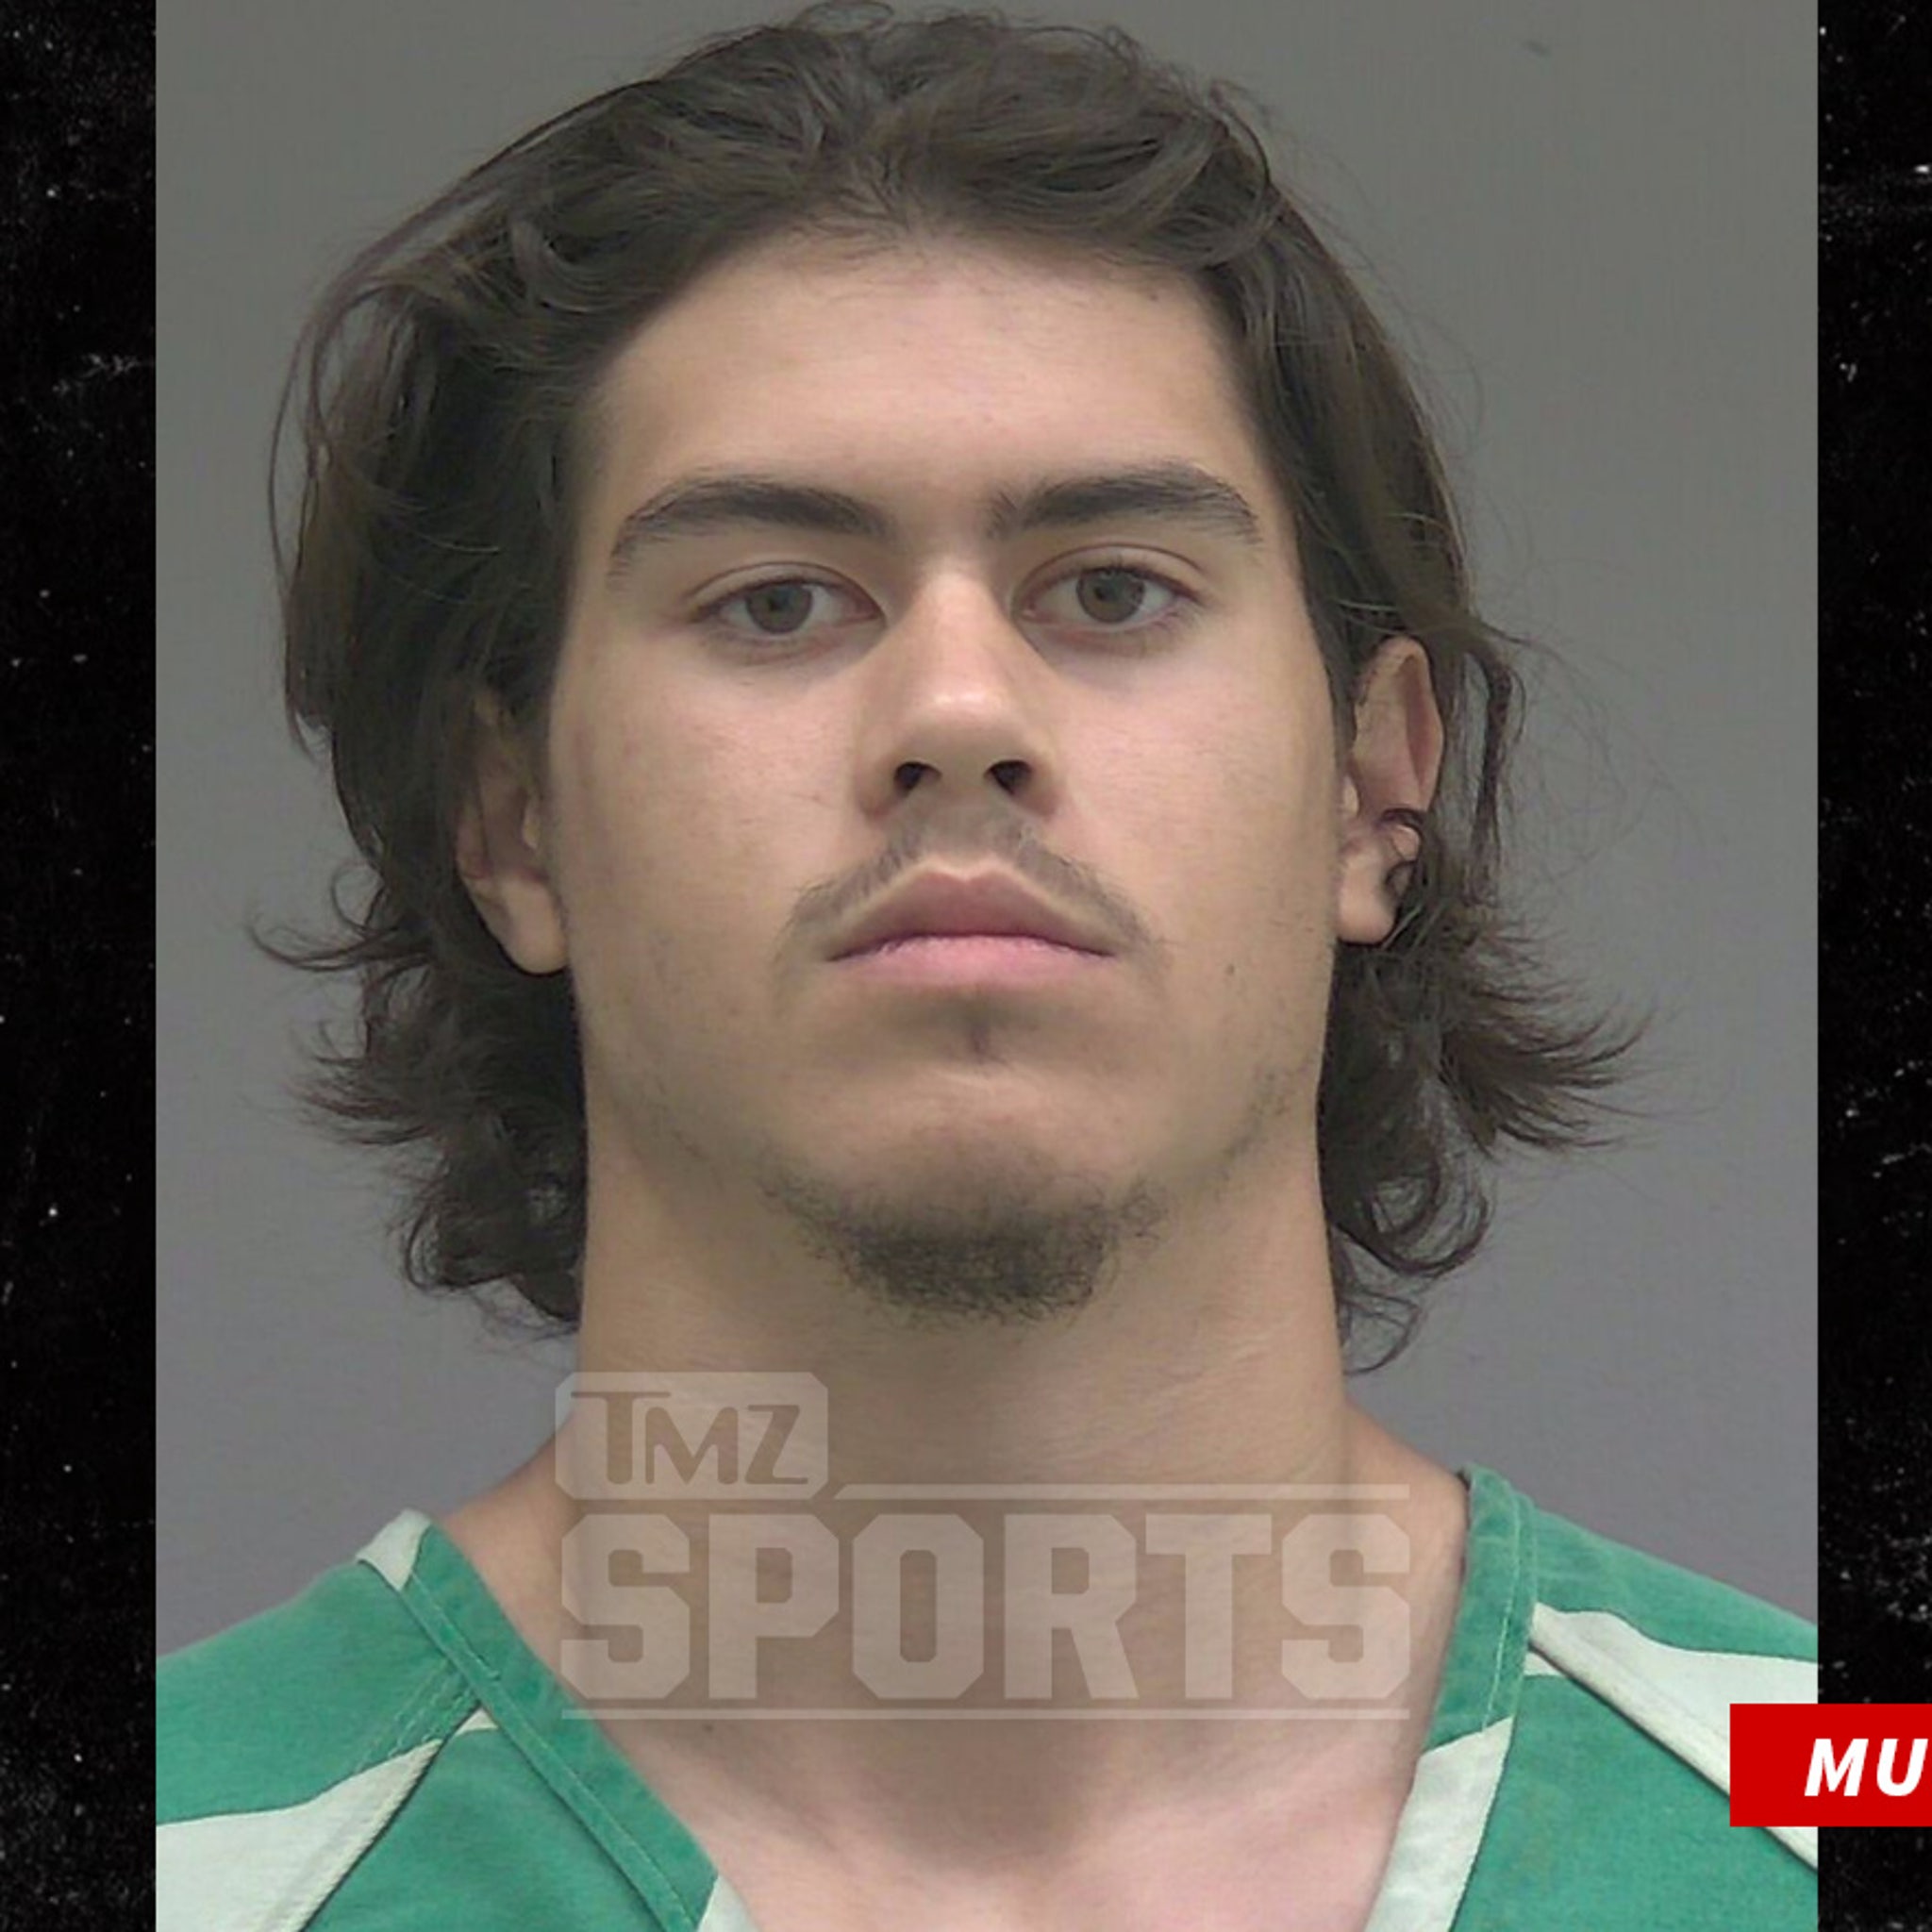 Old And Young 3gp Video Free - UF QB Jalen Kitna Shared Image Of Adult Male Having Sex With Child, Cops Say